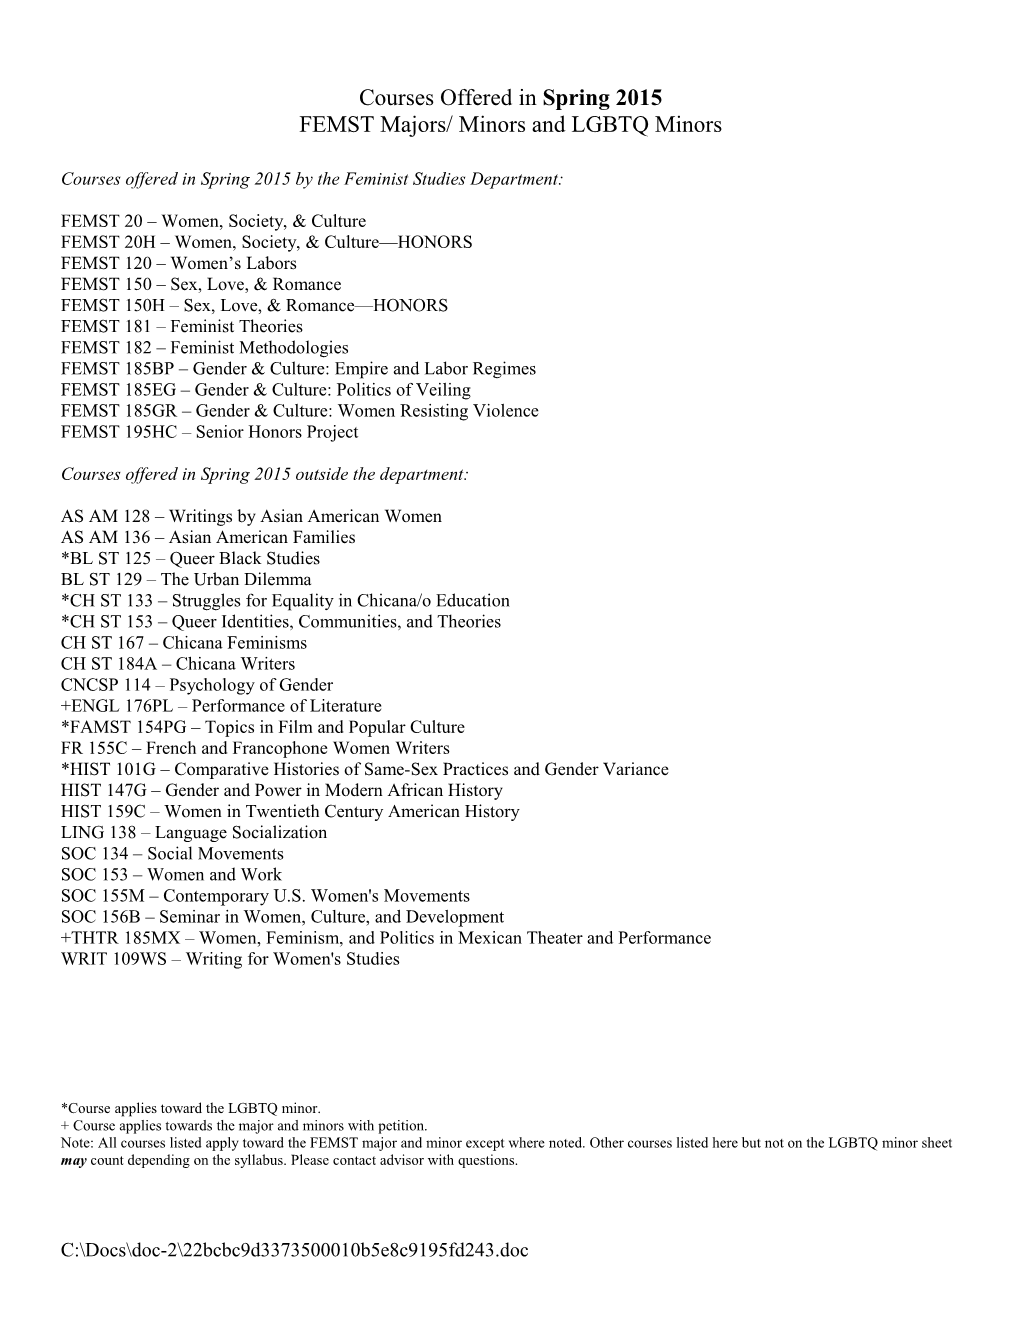 Courses Offered in Fall 2011 for FEMST Majors/ Minors and LGBTQ Minors